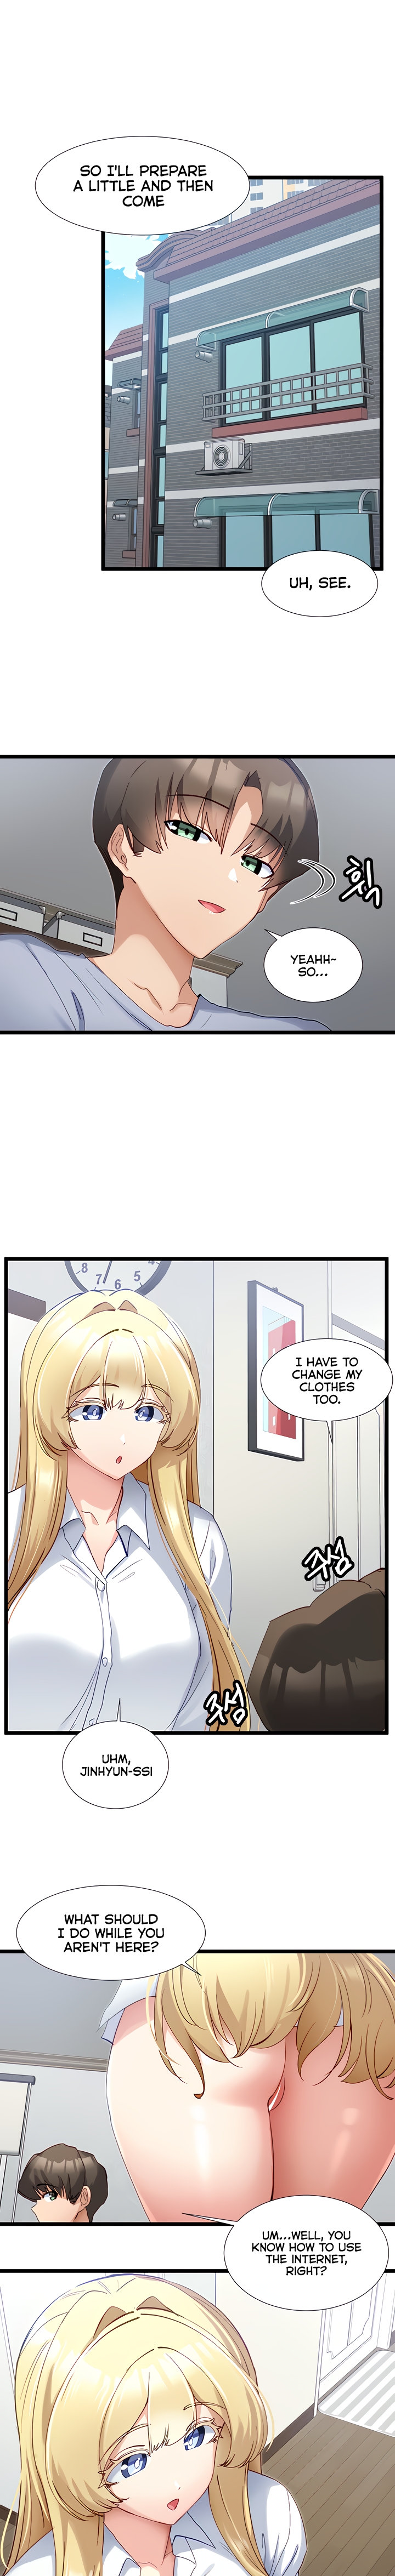 Heroine App - Chapter 37 Page 3